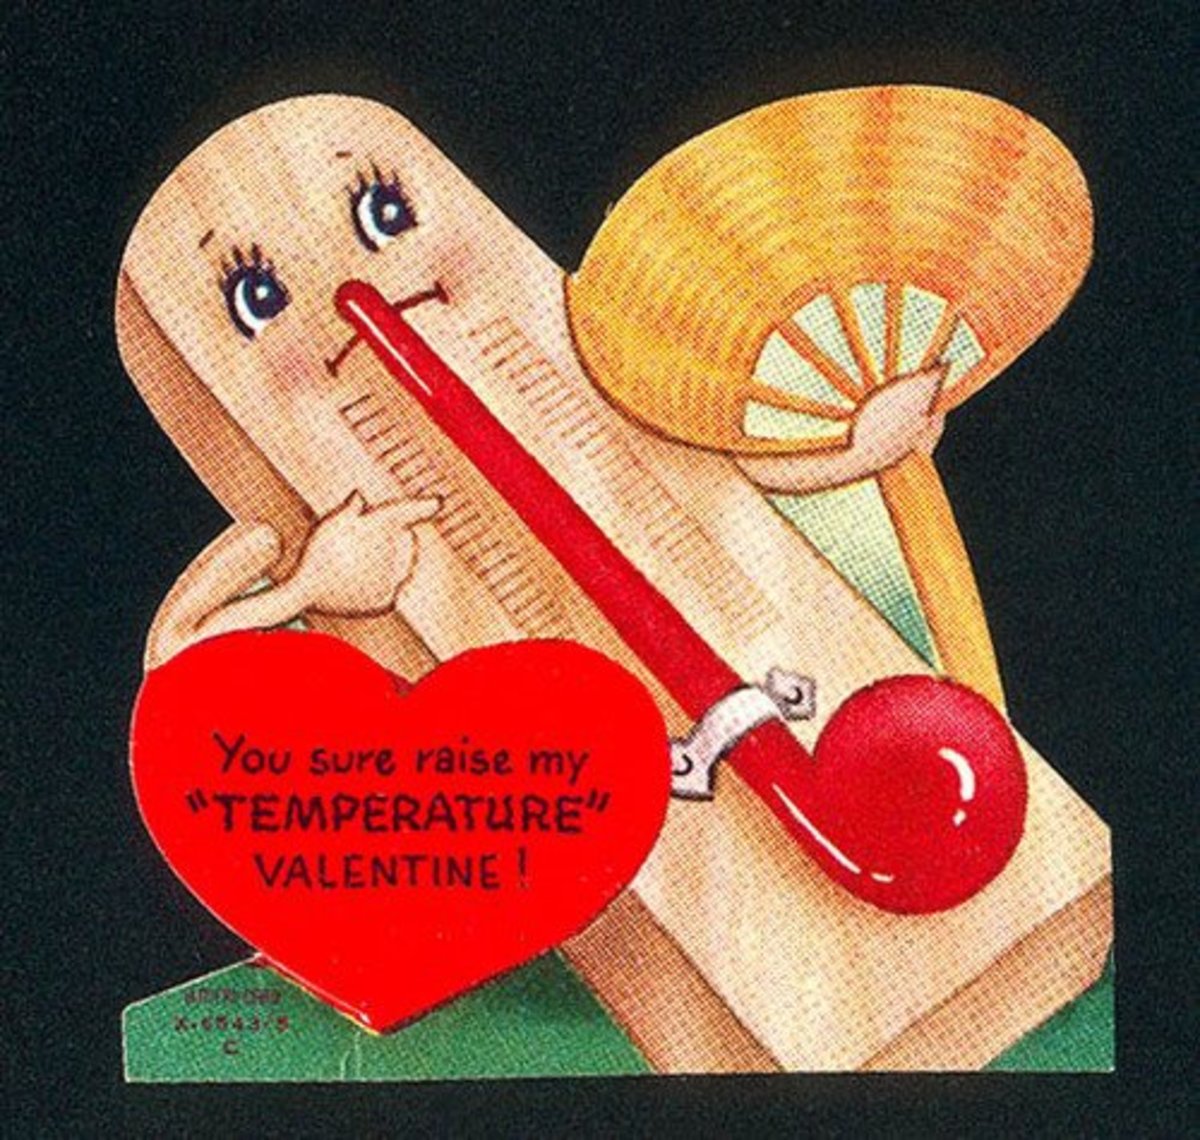 1987 Vintage Risque Novelty Adult Sexy Valentines Day Card Love